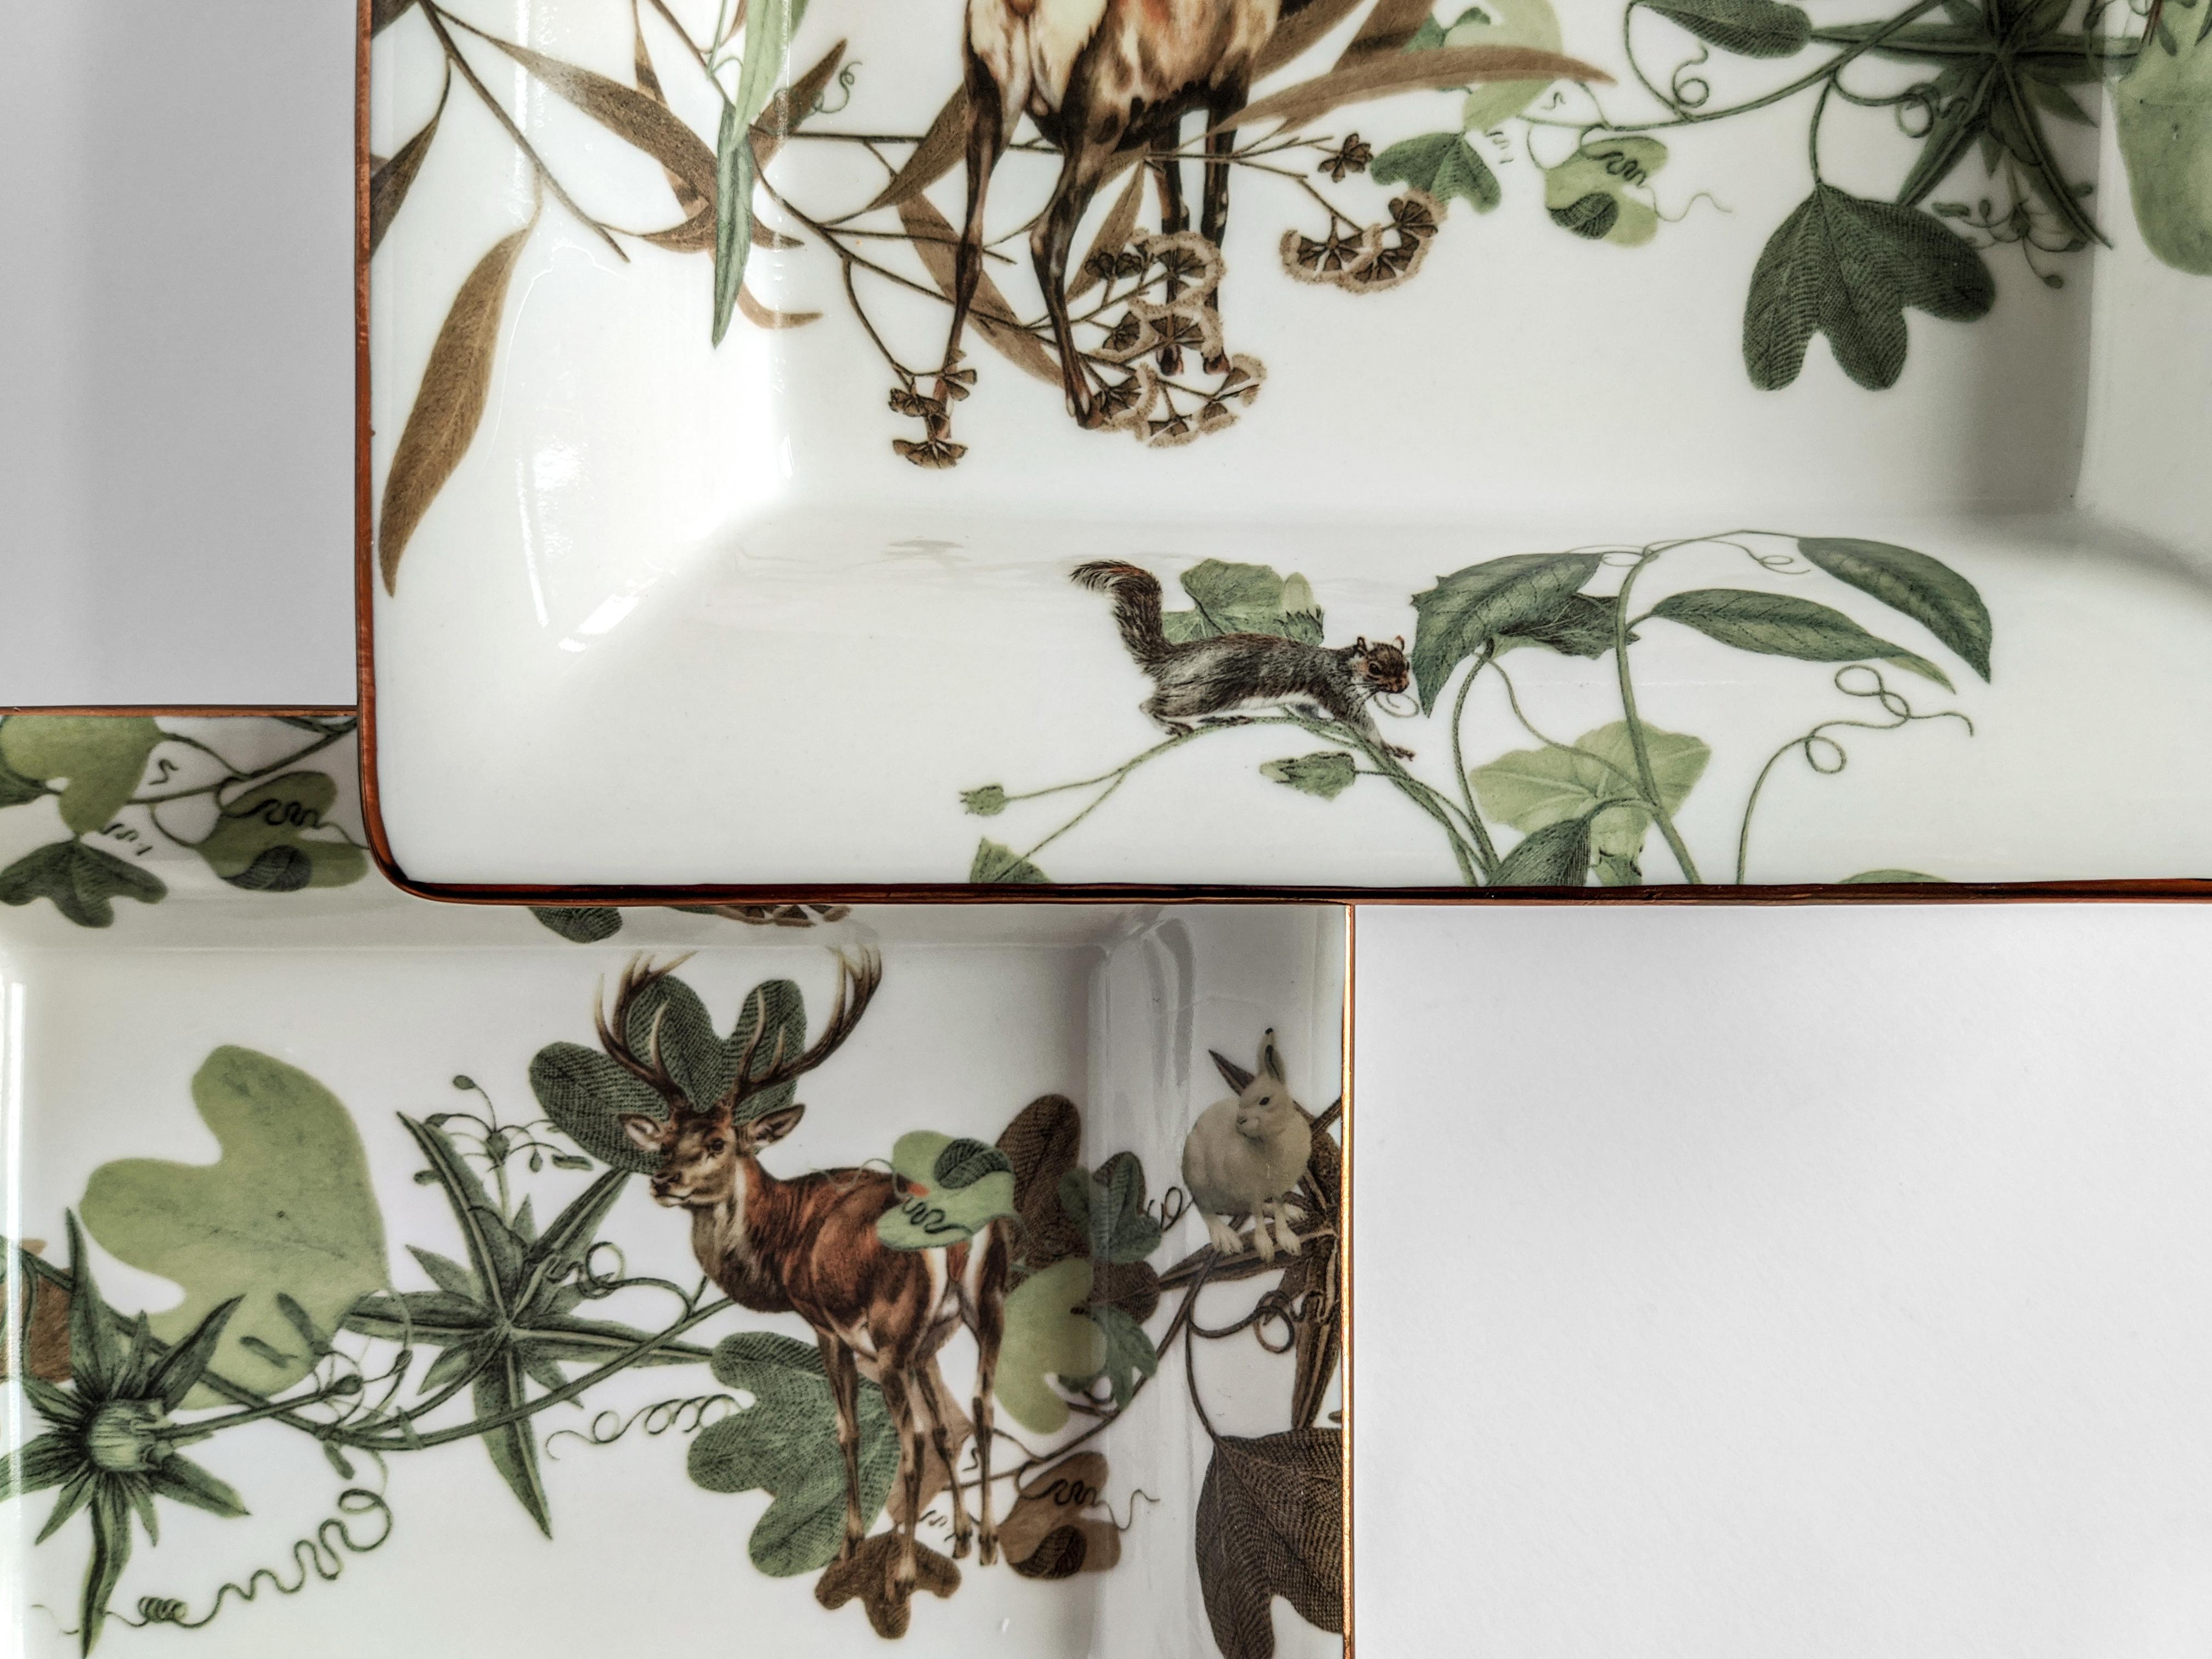 A set of two porcelain pocket emptiers/ashtray with a classic shape and unique printed design. This collection is inspired by Vito's hometown in south Italy, Puglia. This items are embellished with animals and branches inspired by the fauna and